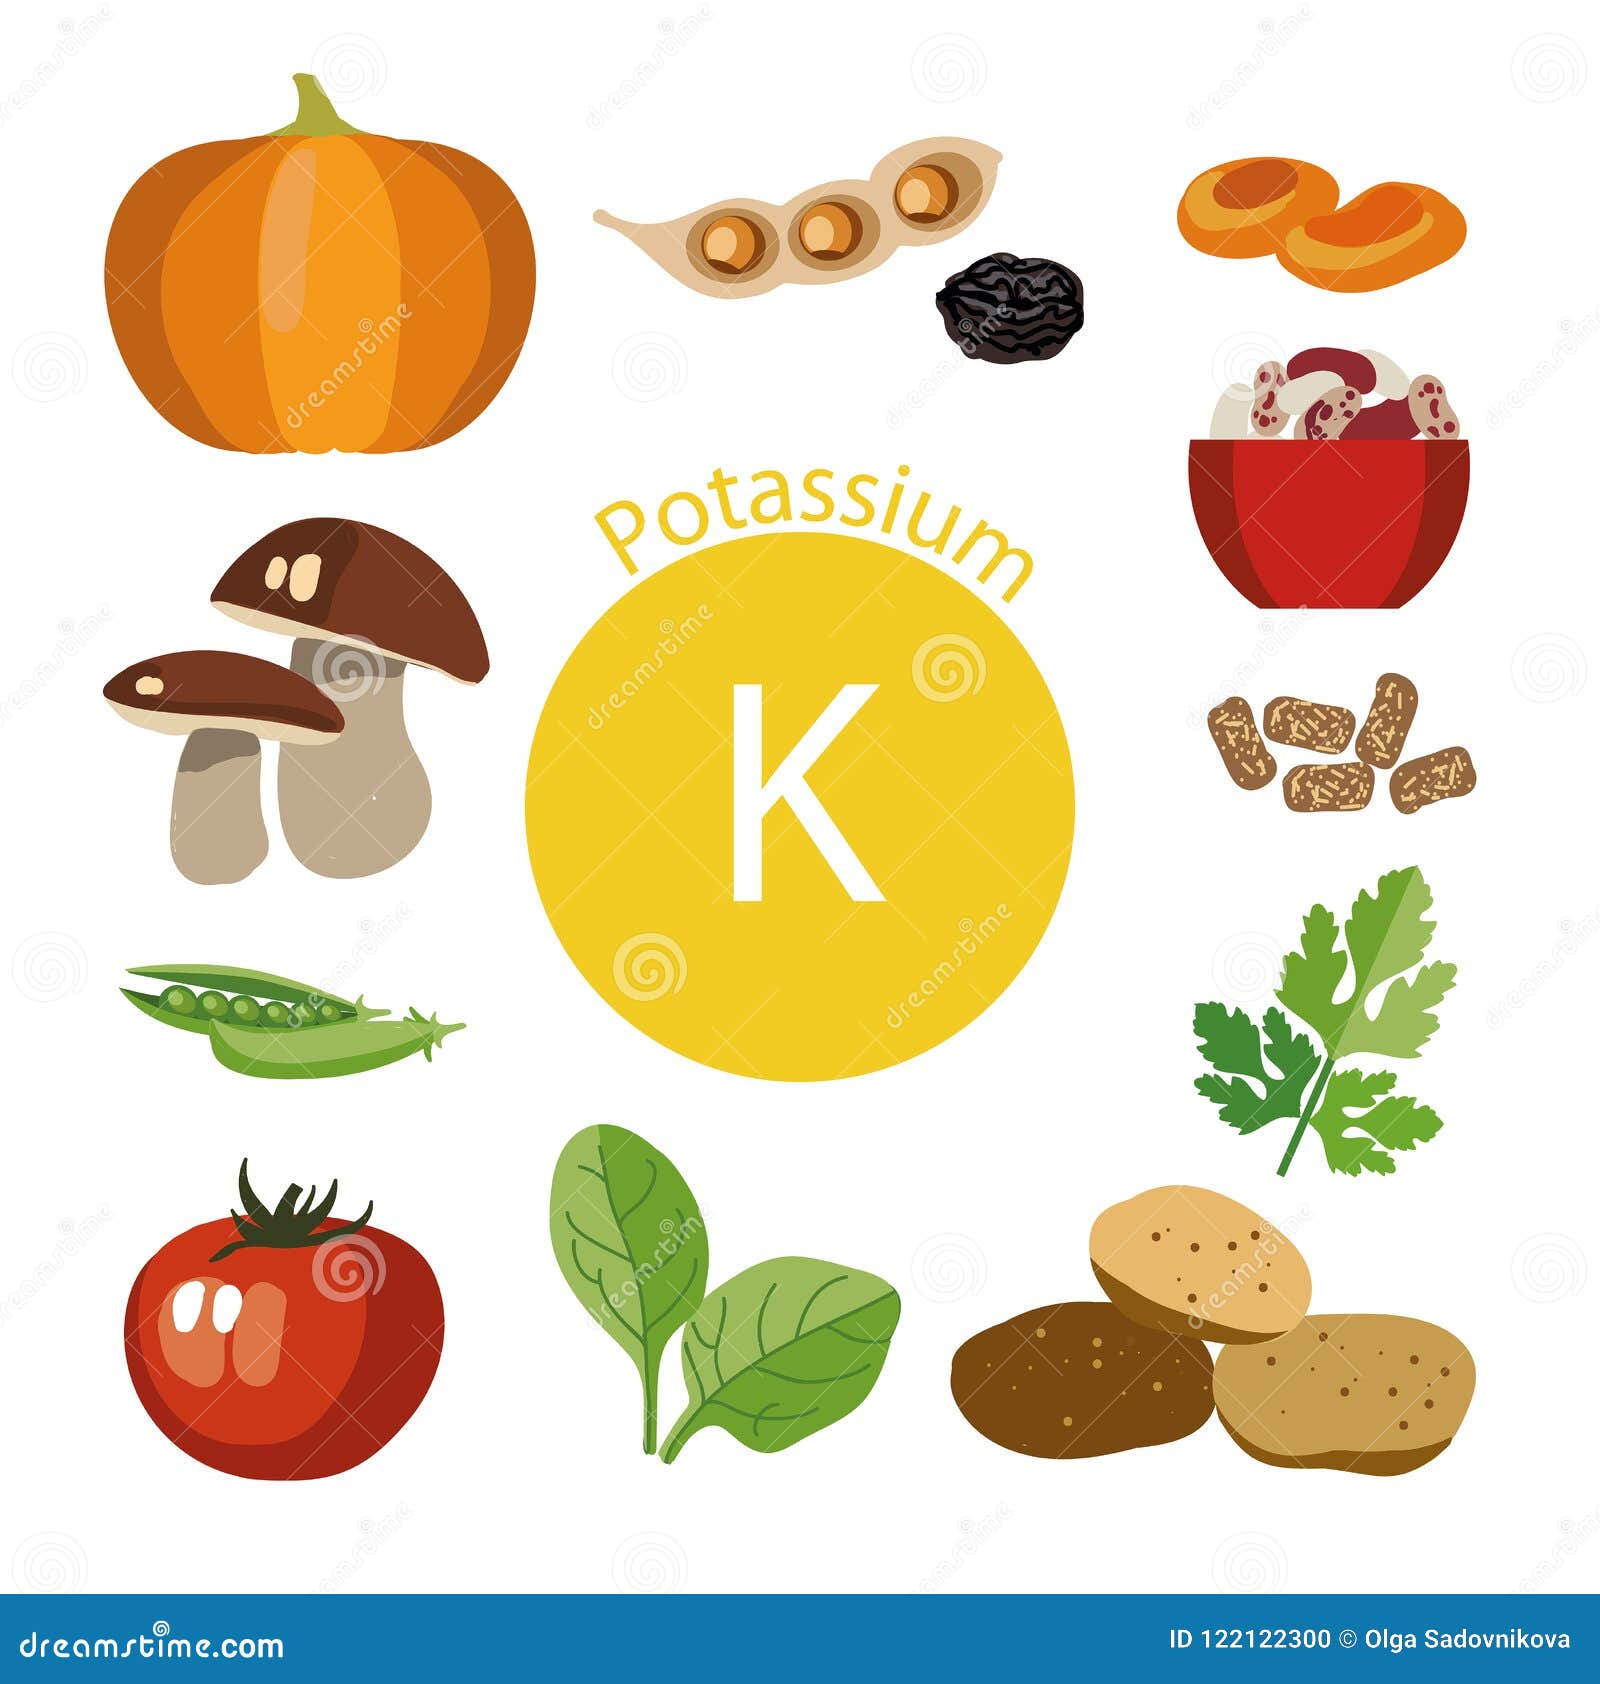 Foods That Are Rich in Potassium